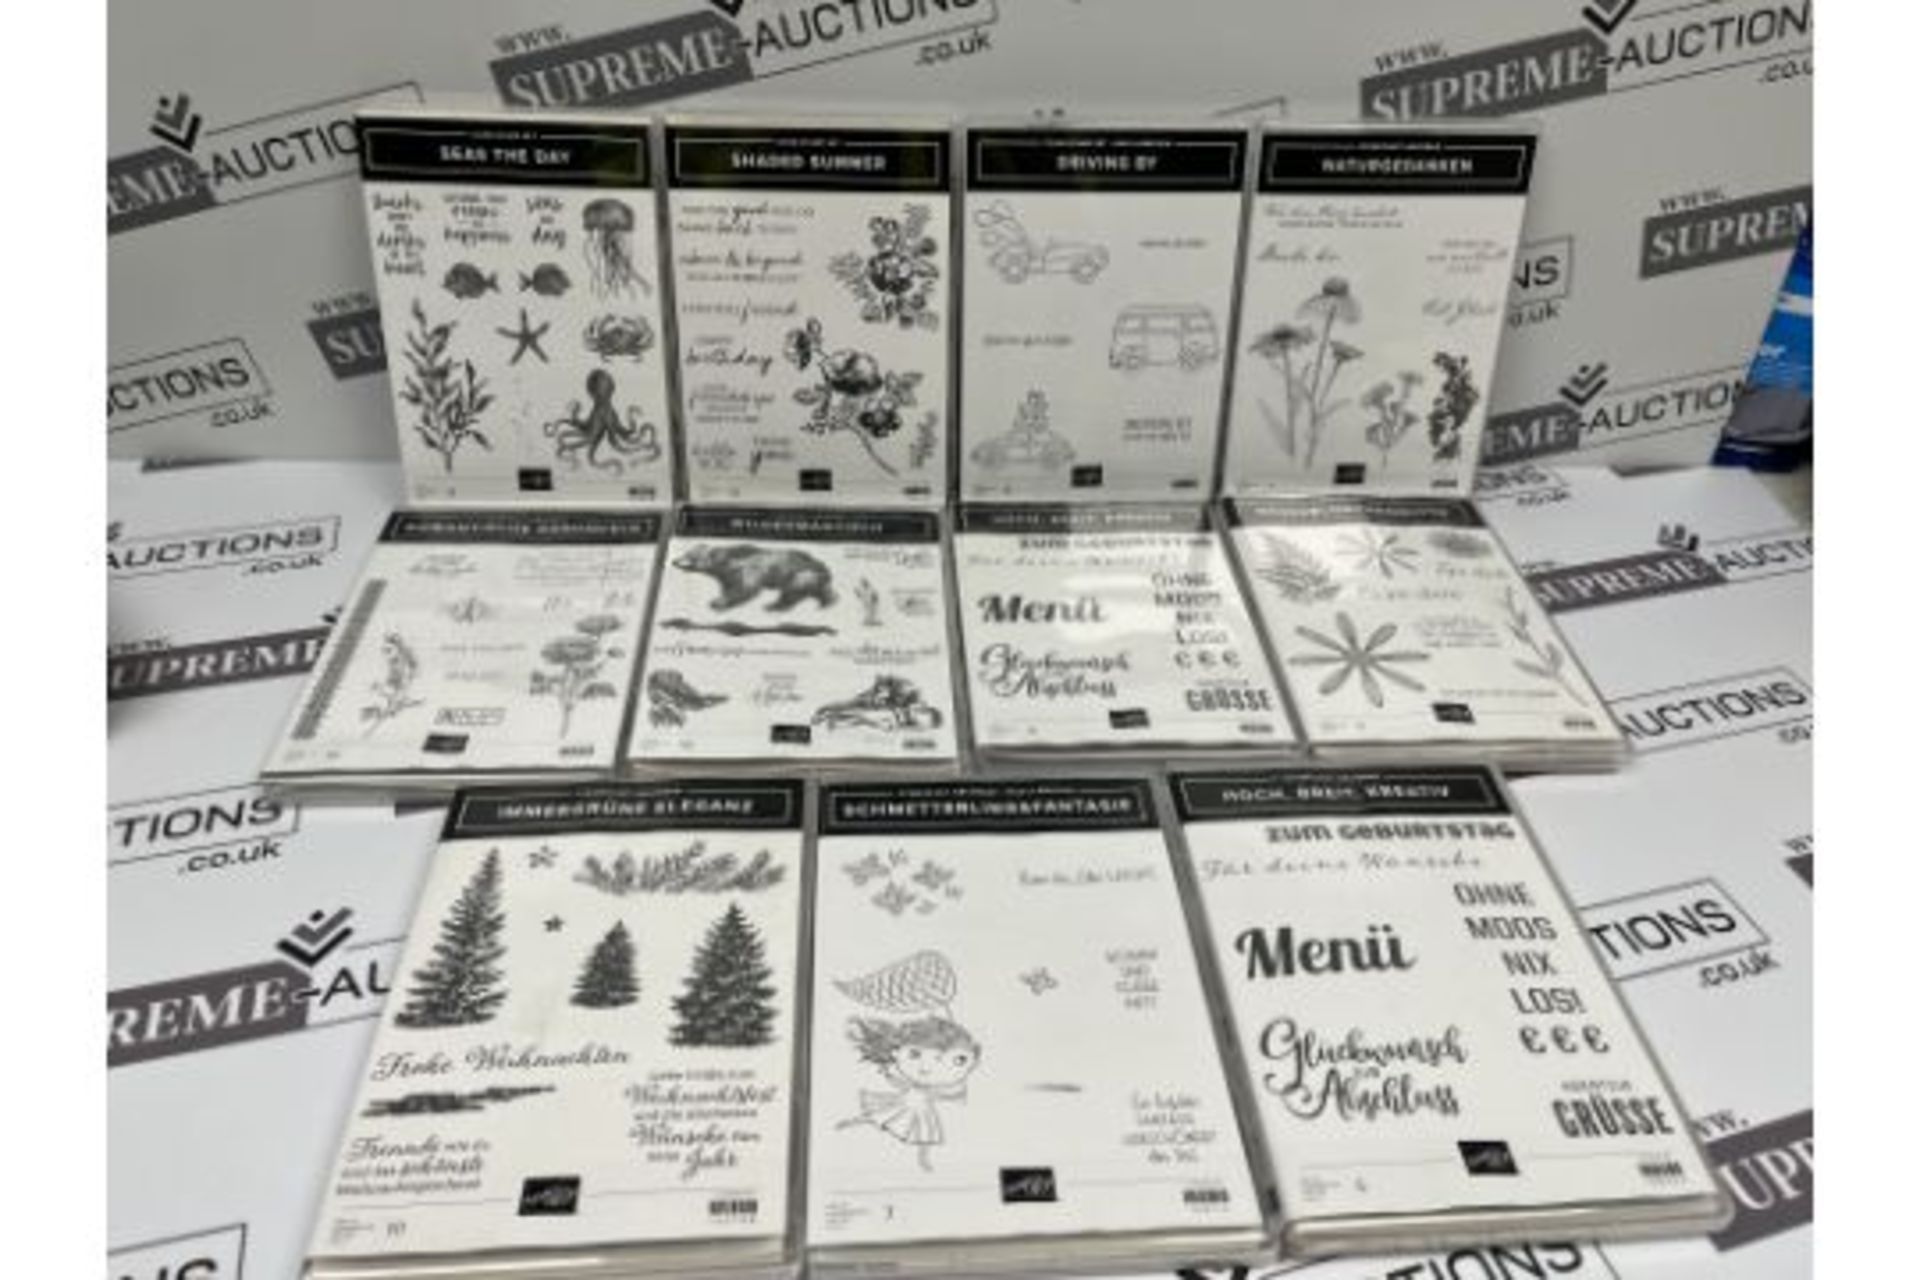 TRADE LOT 200 X BRAND NEW STAMPIN UP CLING STAMP SETS RRP £30 EACH (STAMPS MAY VARY) R13-16